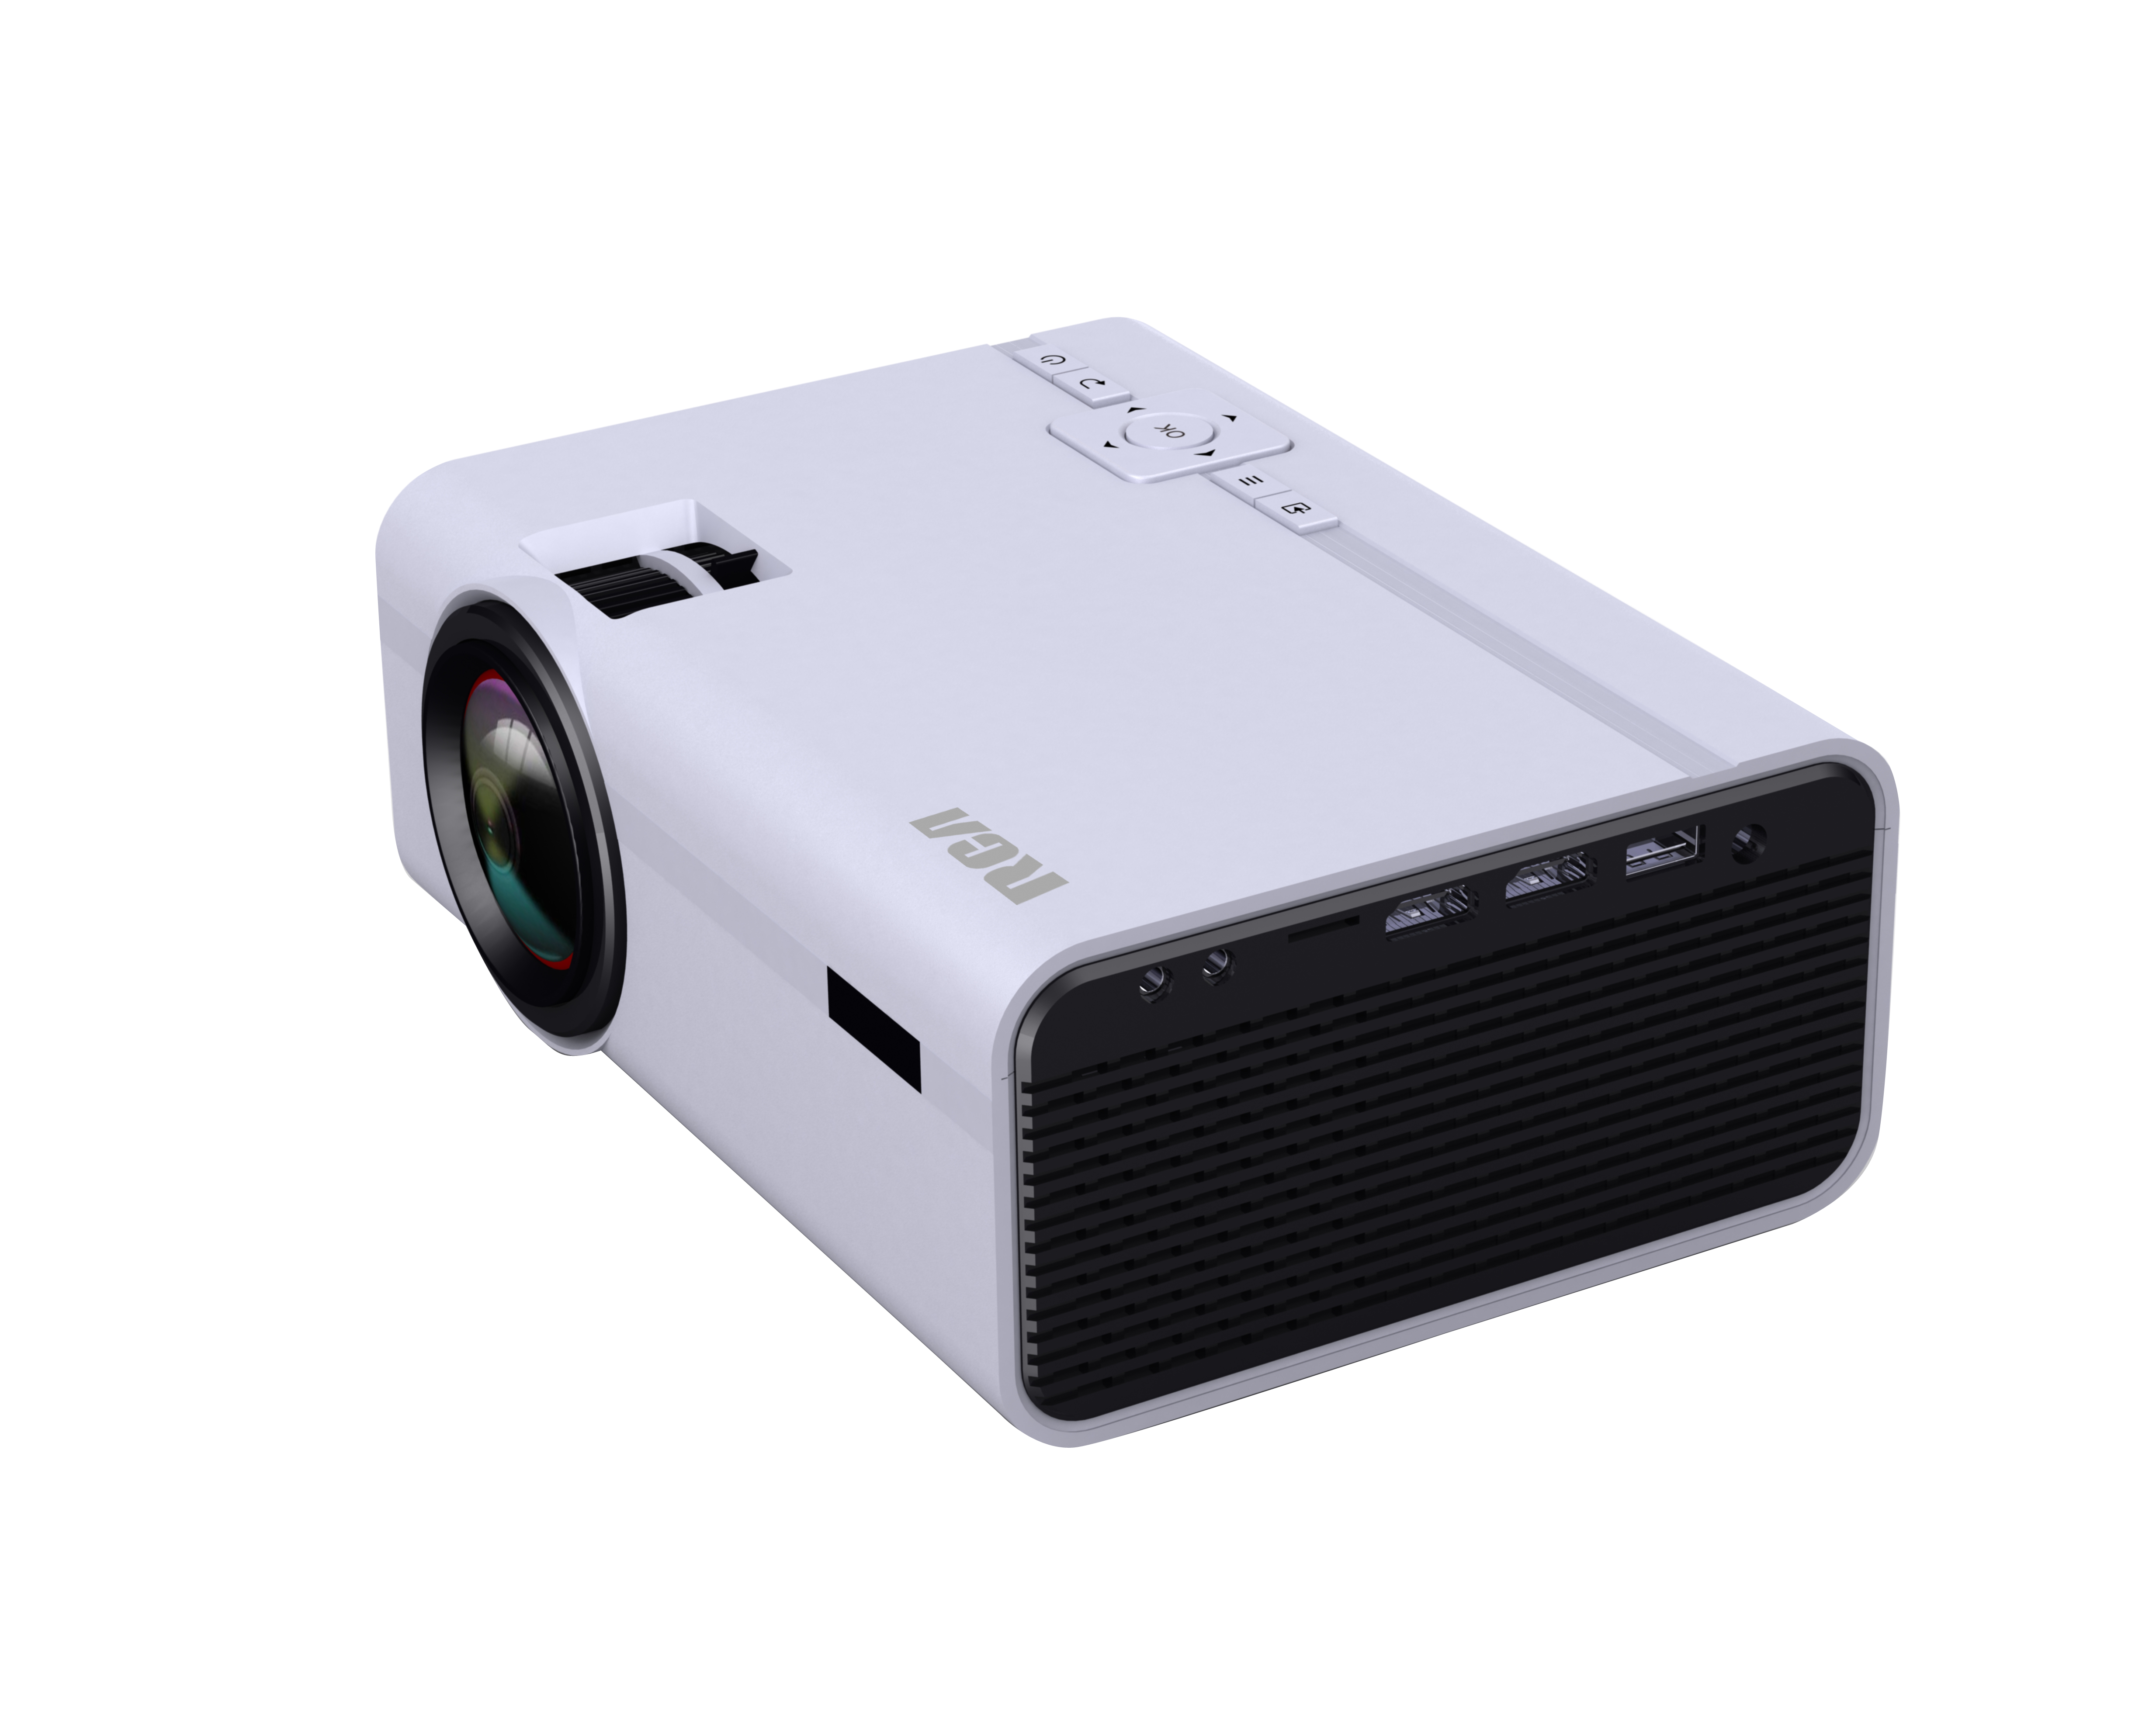 RCA RPJ119 Home Theater Projector - up to 150 Lumens 1080p Playback - image 4 of 7